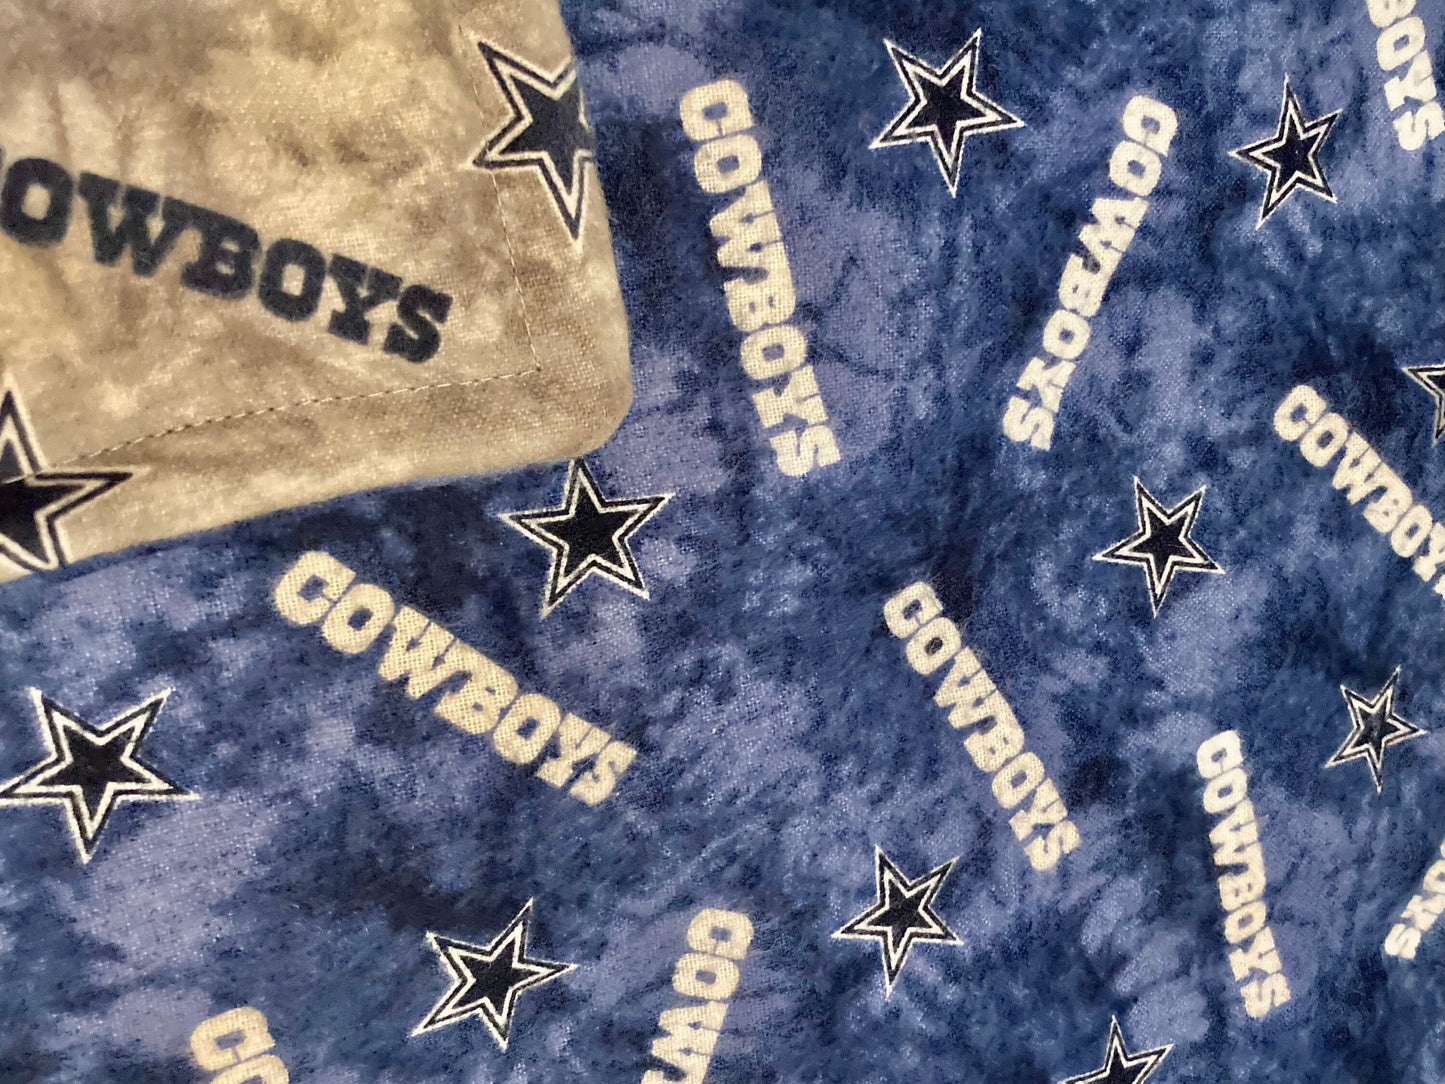 Perfect Dallas Cowboy warm and luxurious reversible blanket!